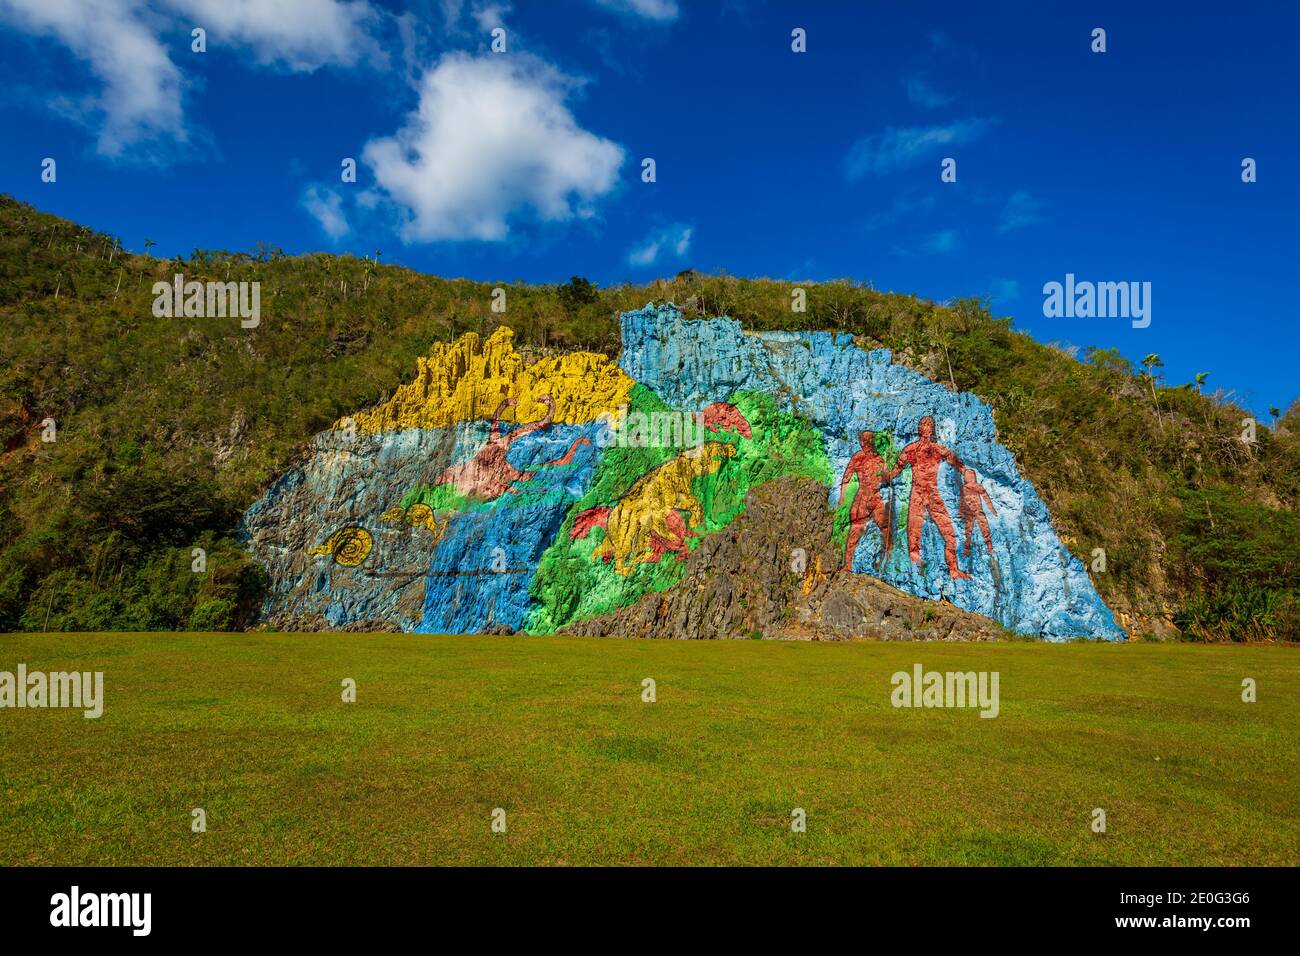 The Mural of Prehistory in the valley of Dos Hermanas, shows the evolution of life in a natural sense of Cuba. Stock Photo